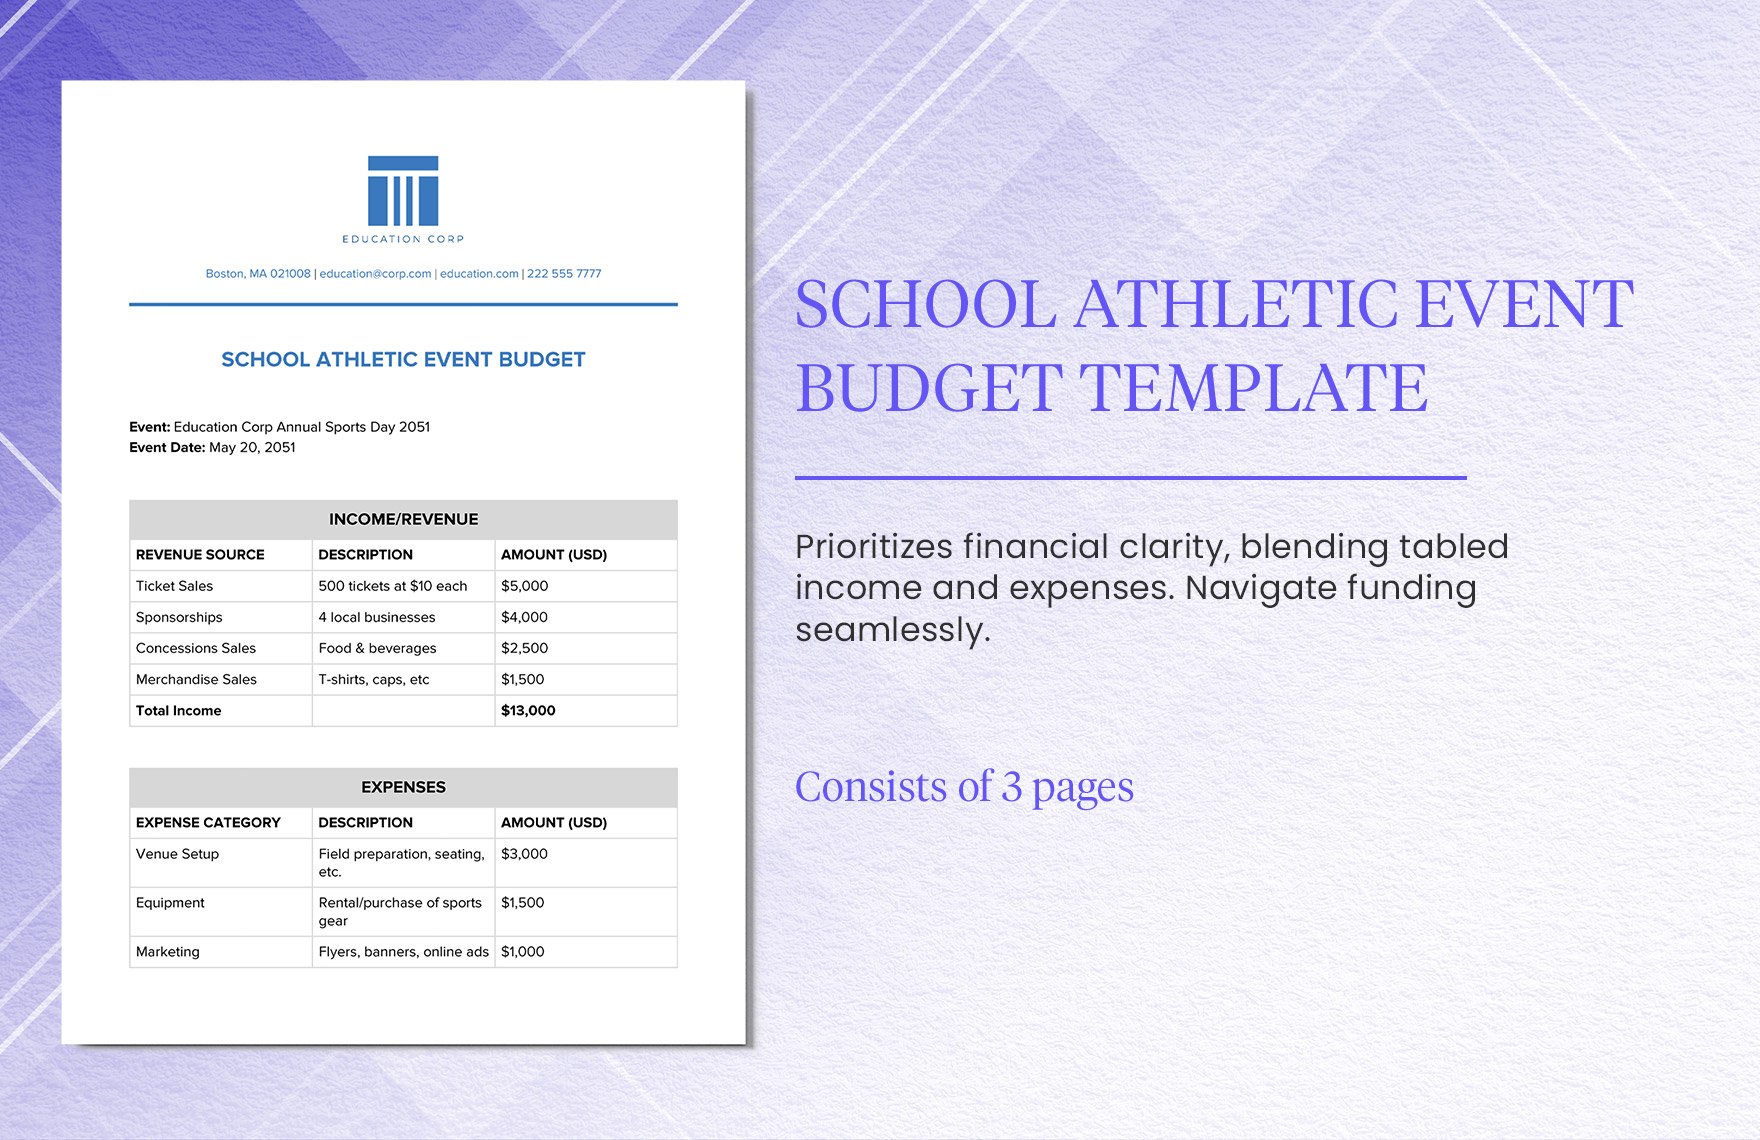 School Athletic Event Budget Template